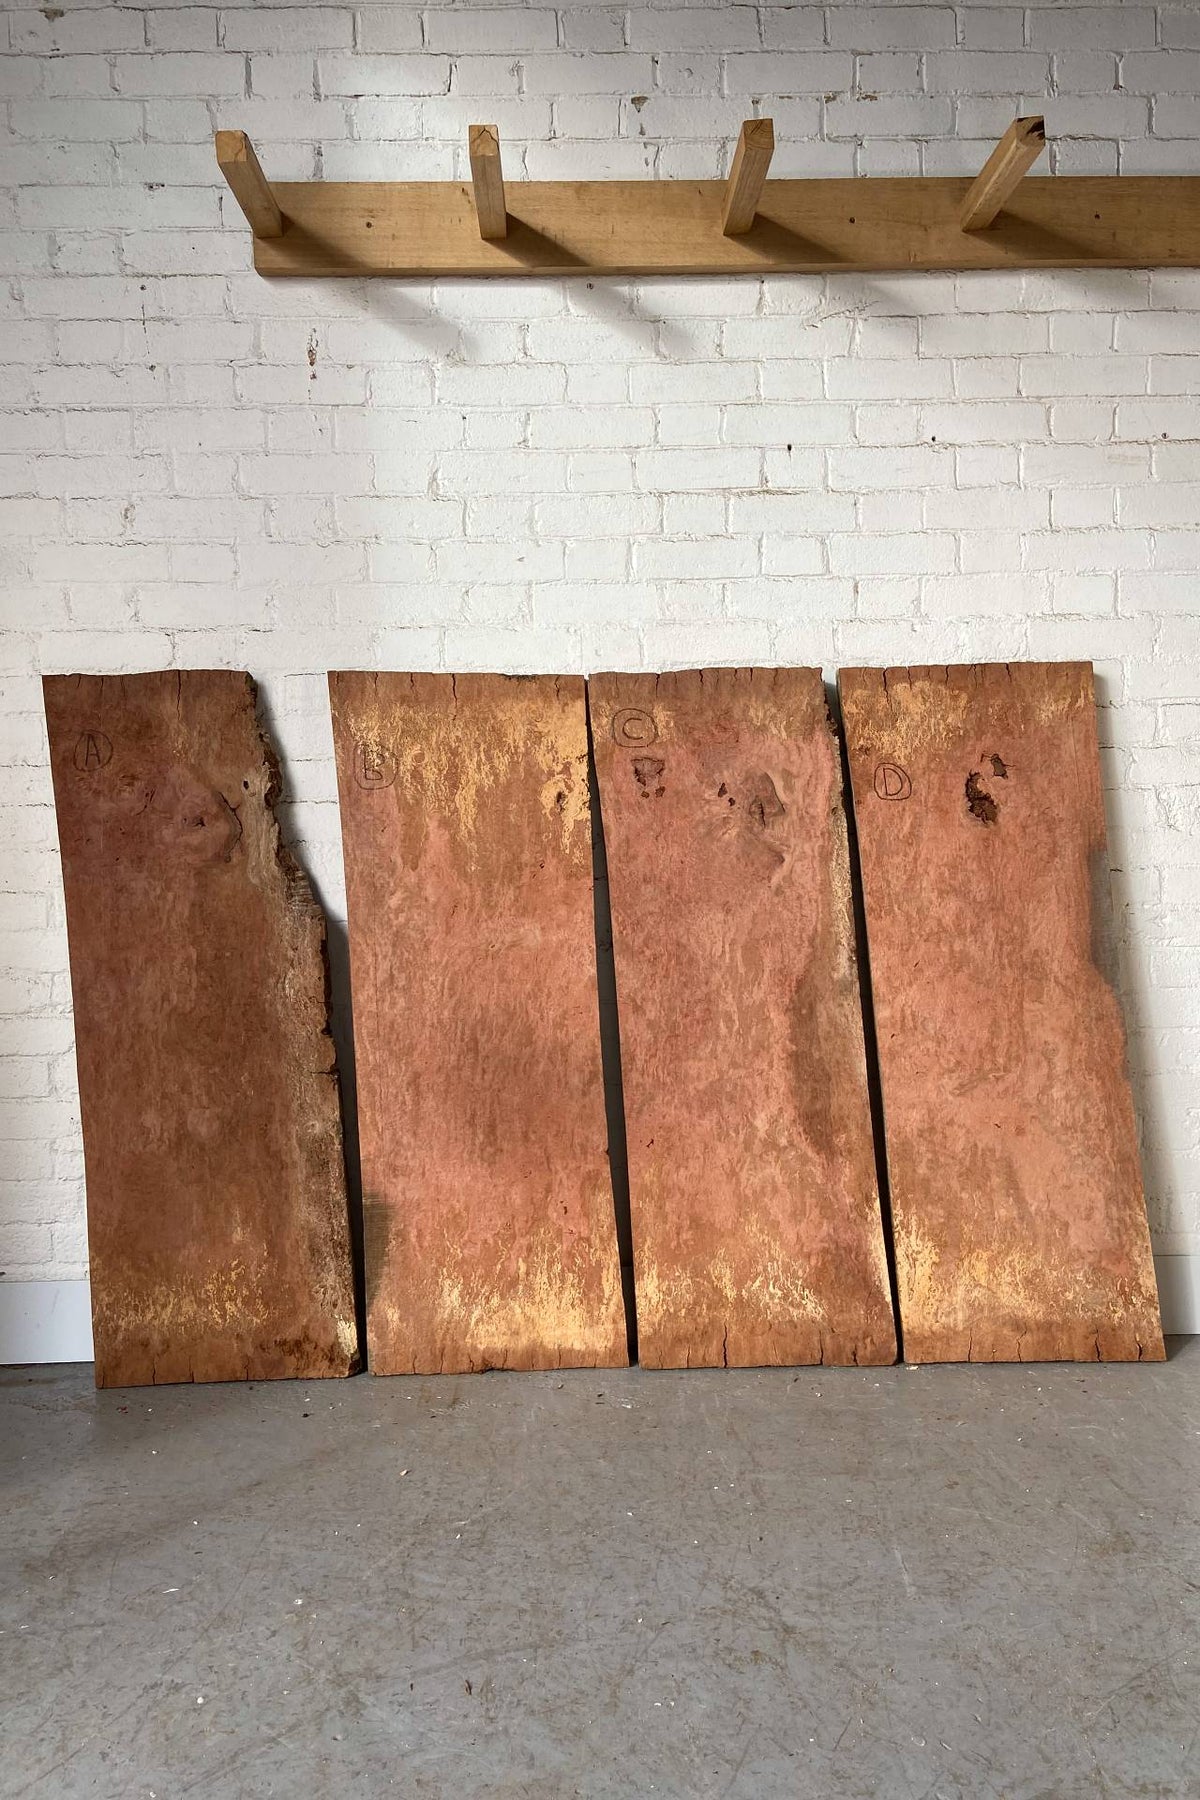 London Plane - Heavy Burr and Pip Boards